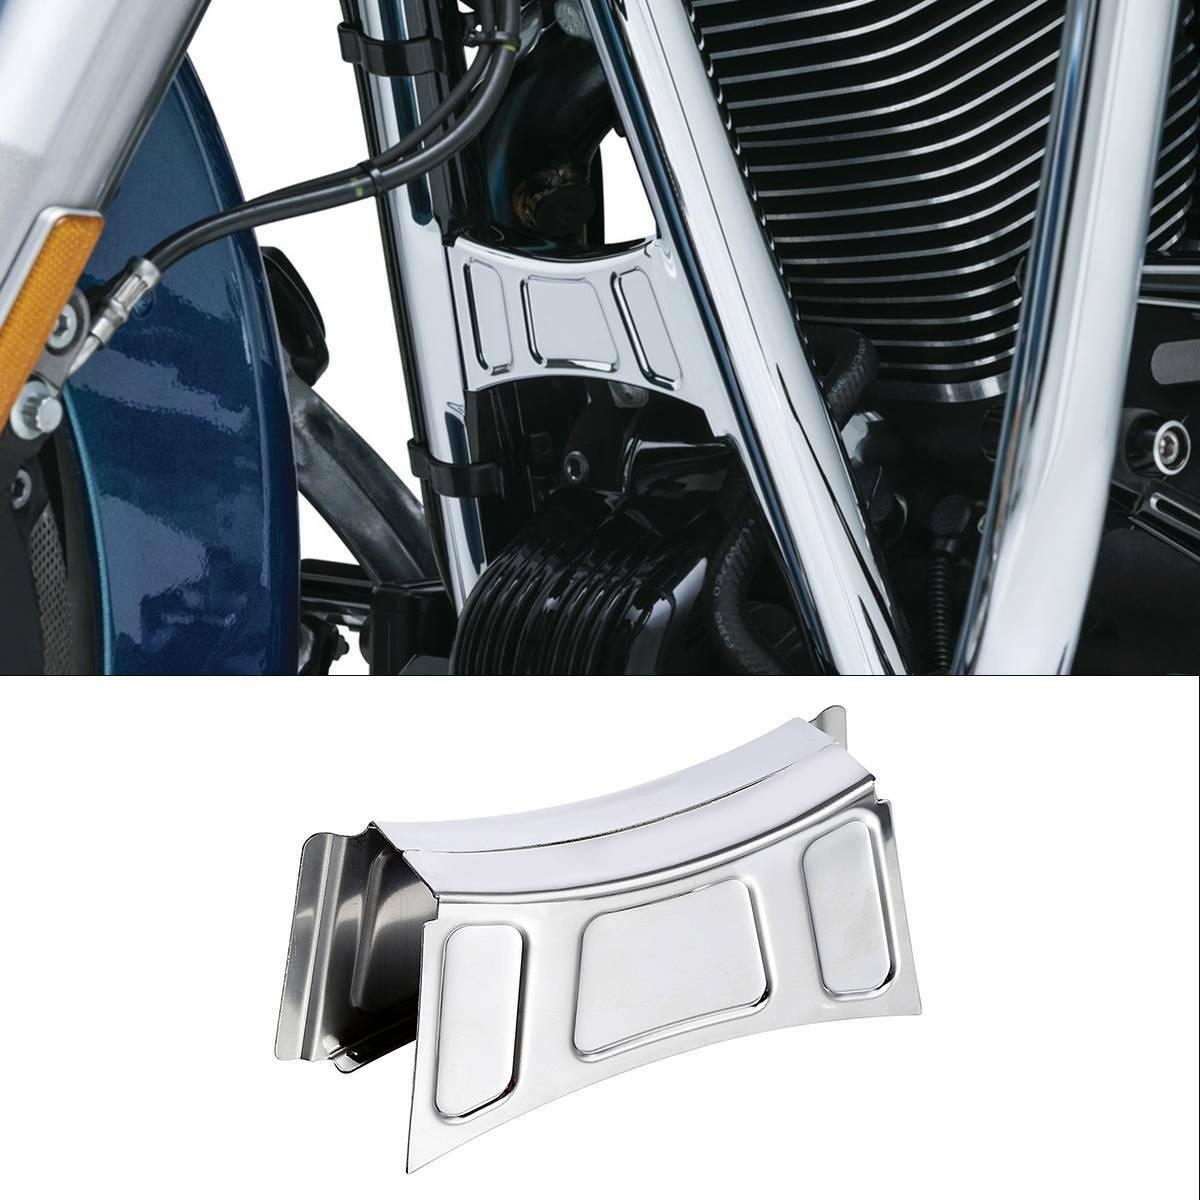 Frame Downtube Crossbrace Cover Accent Trim Fit For Harley Electra Glide 99-13 - Moto Life Products